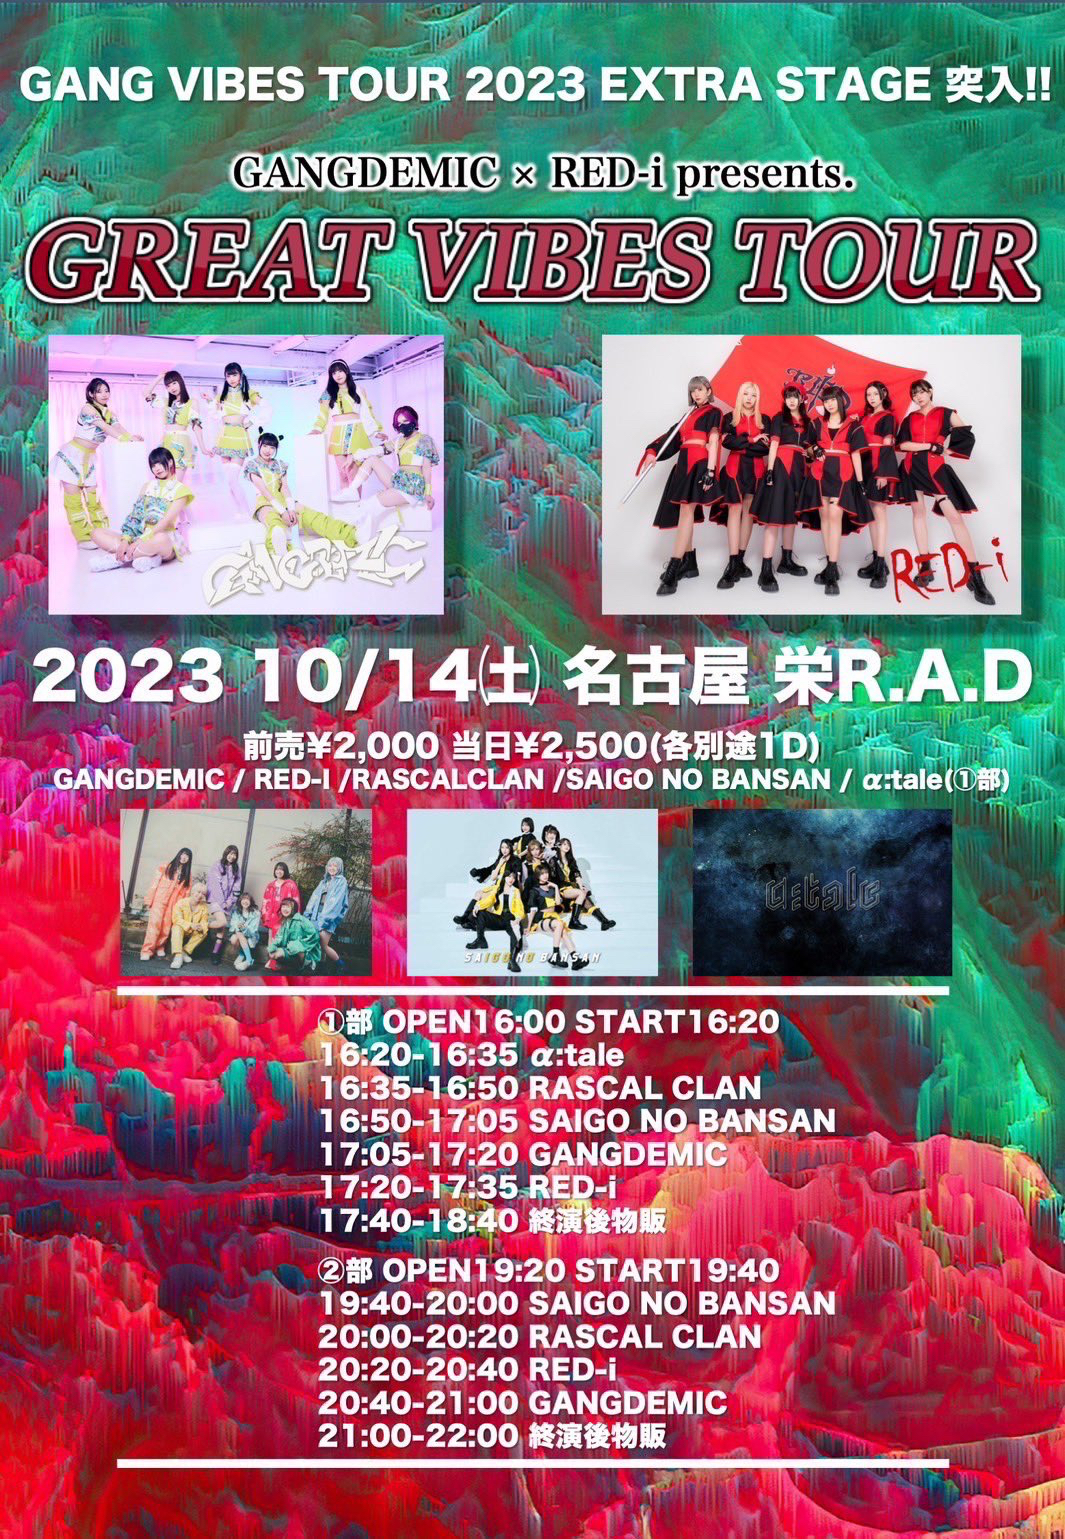 GANGDEMIC × RED-i presents. GREAT VIBES TOUR